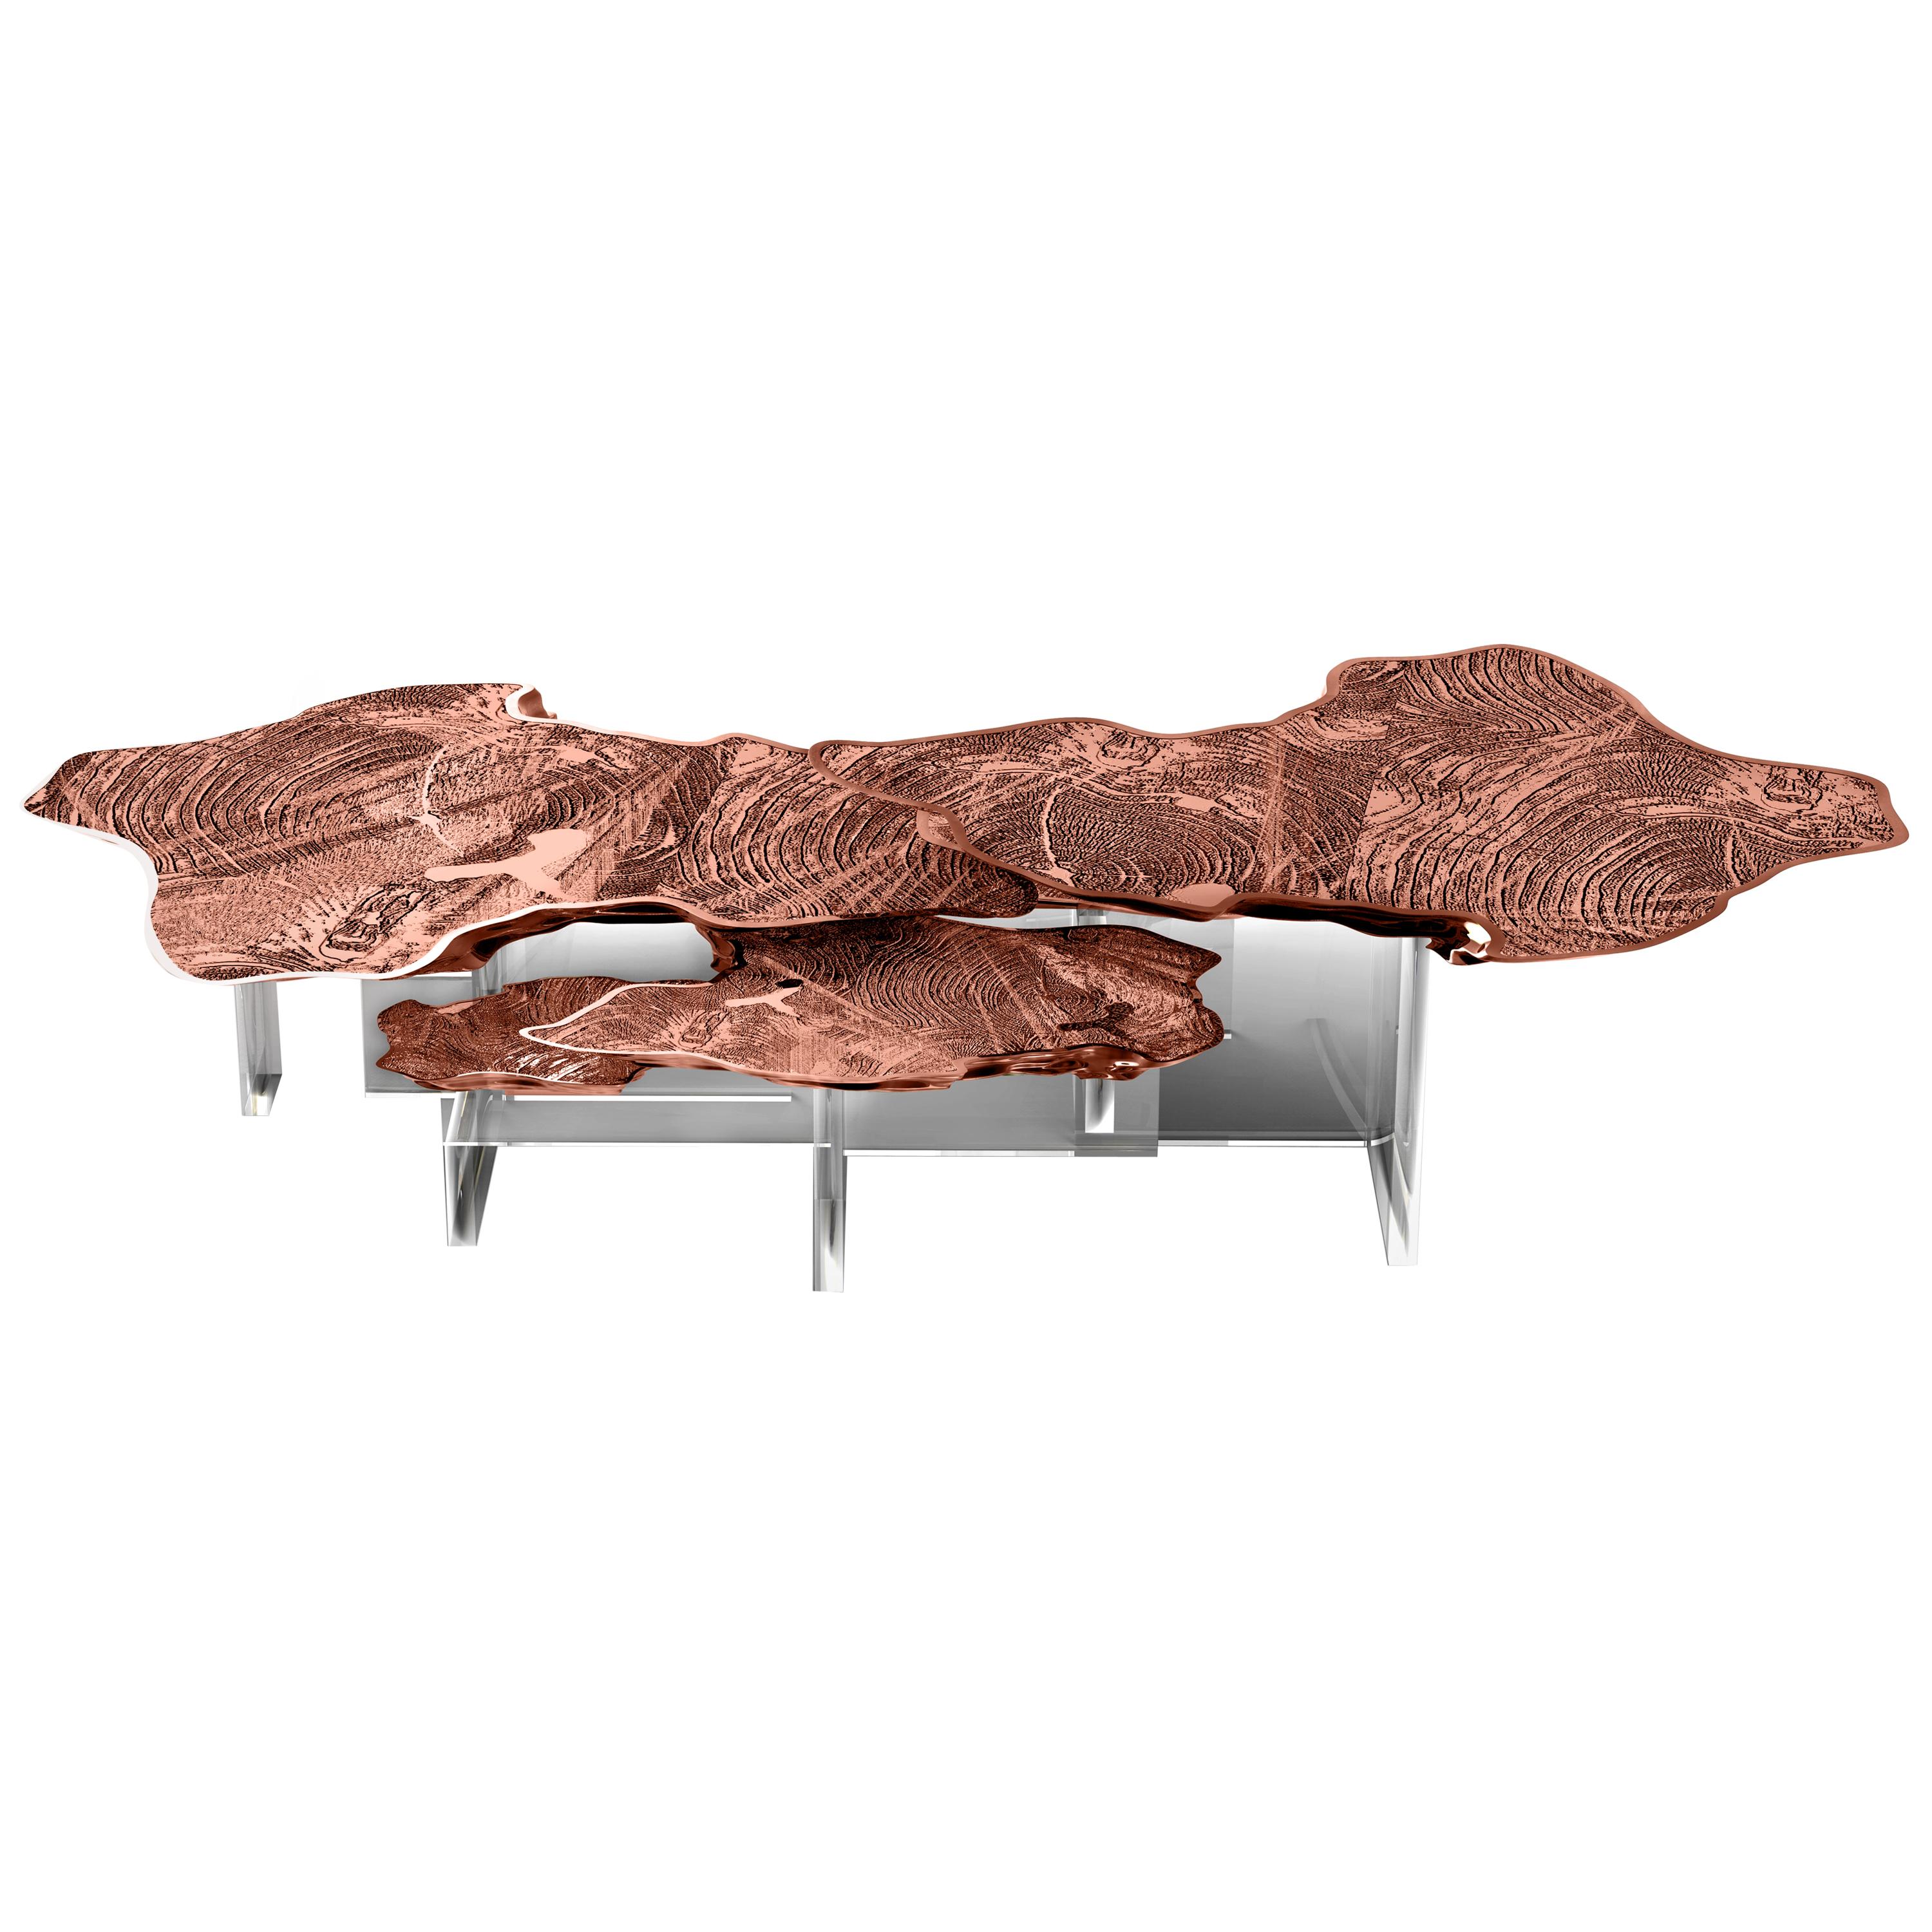 Monet Center Table with Copper Leaf over Aluminum Top and Acrylic Base